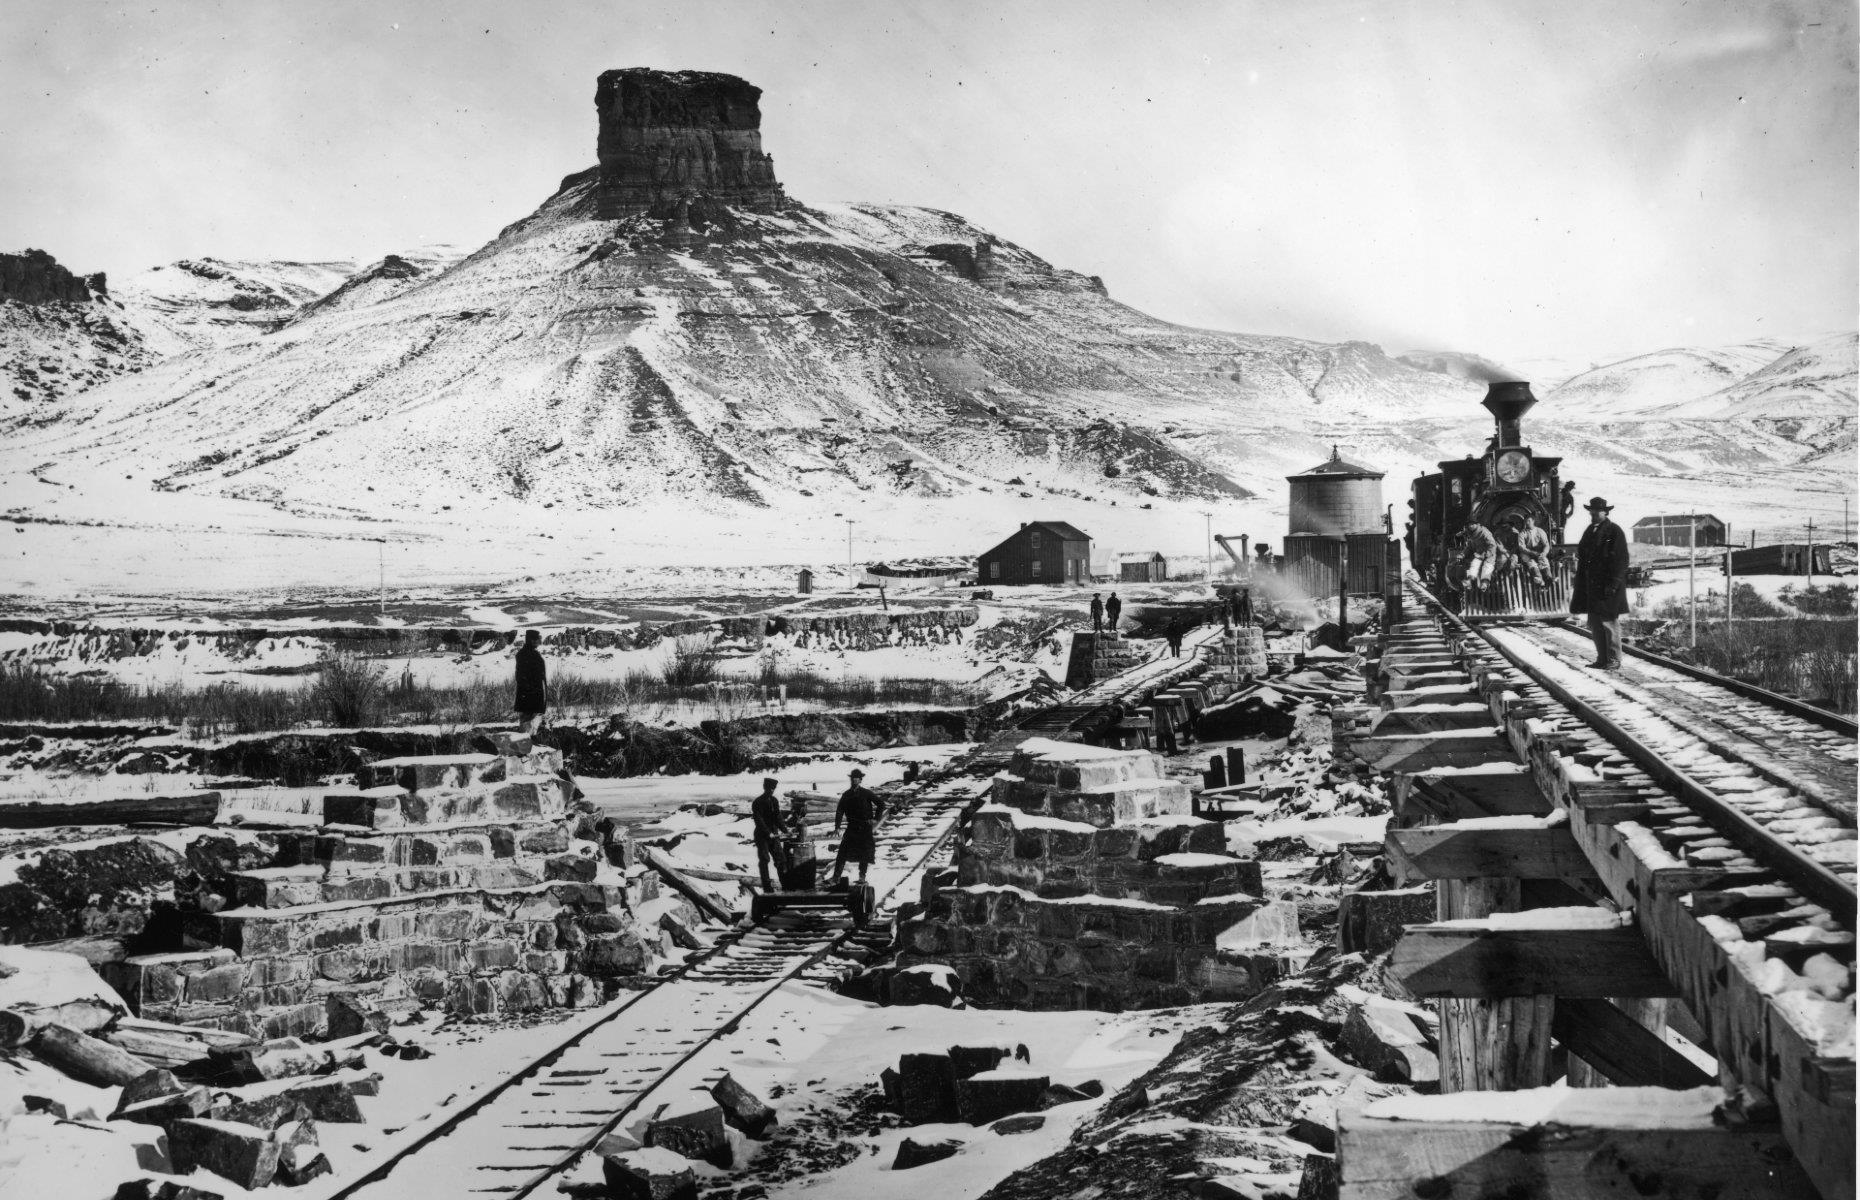 <p>Soon, the railways were expanding even more quickly than they had before the Civil War. After peace was declared, work accelerated on the biggest civil engineering project America had ever seen – the transcontinental railroad. Stretching from Omaha in Nebraska to Sacramento in California, the 1,776-mile  line was built by speedy track-laying crews who were incentivized to lay one to two miles of track per day. Laborers worked in all weathers to ensure the work was completed in a timely fashion.</p>